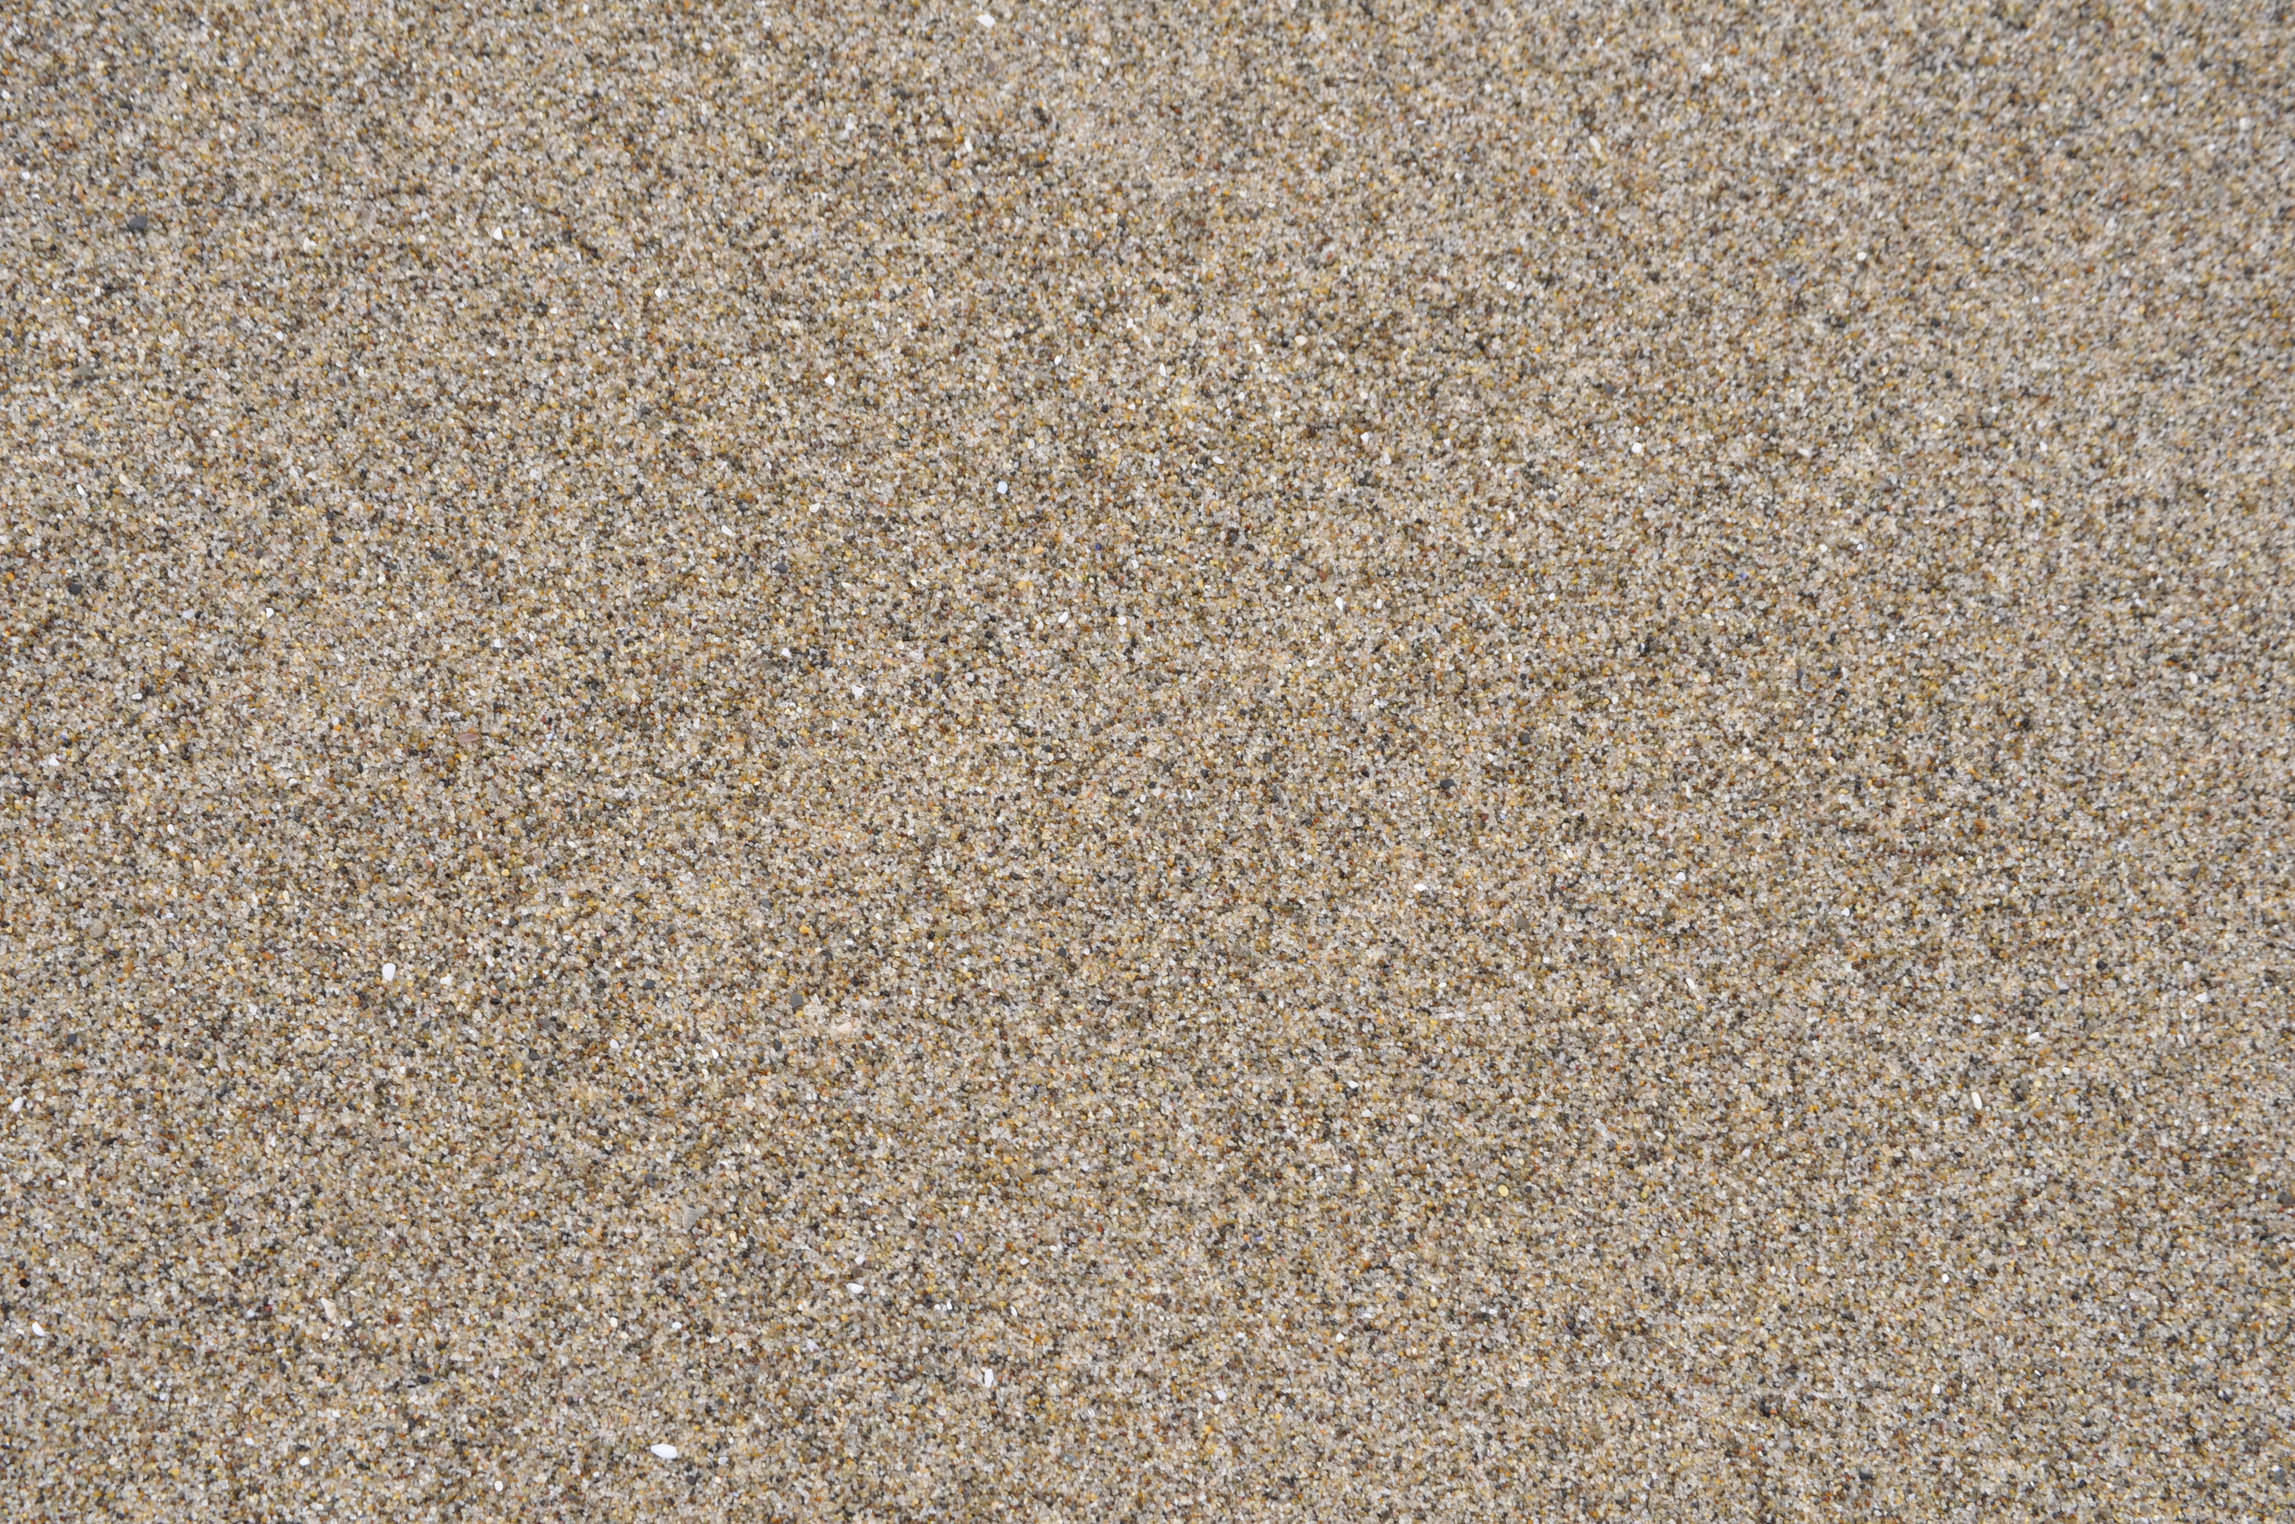 Sand Texture For Free Download